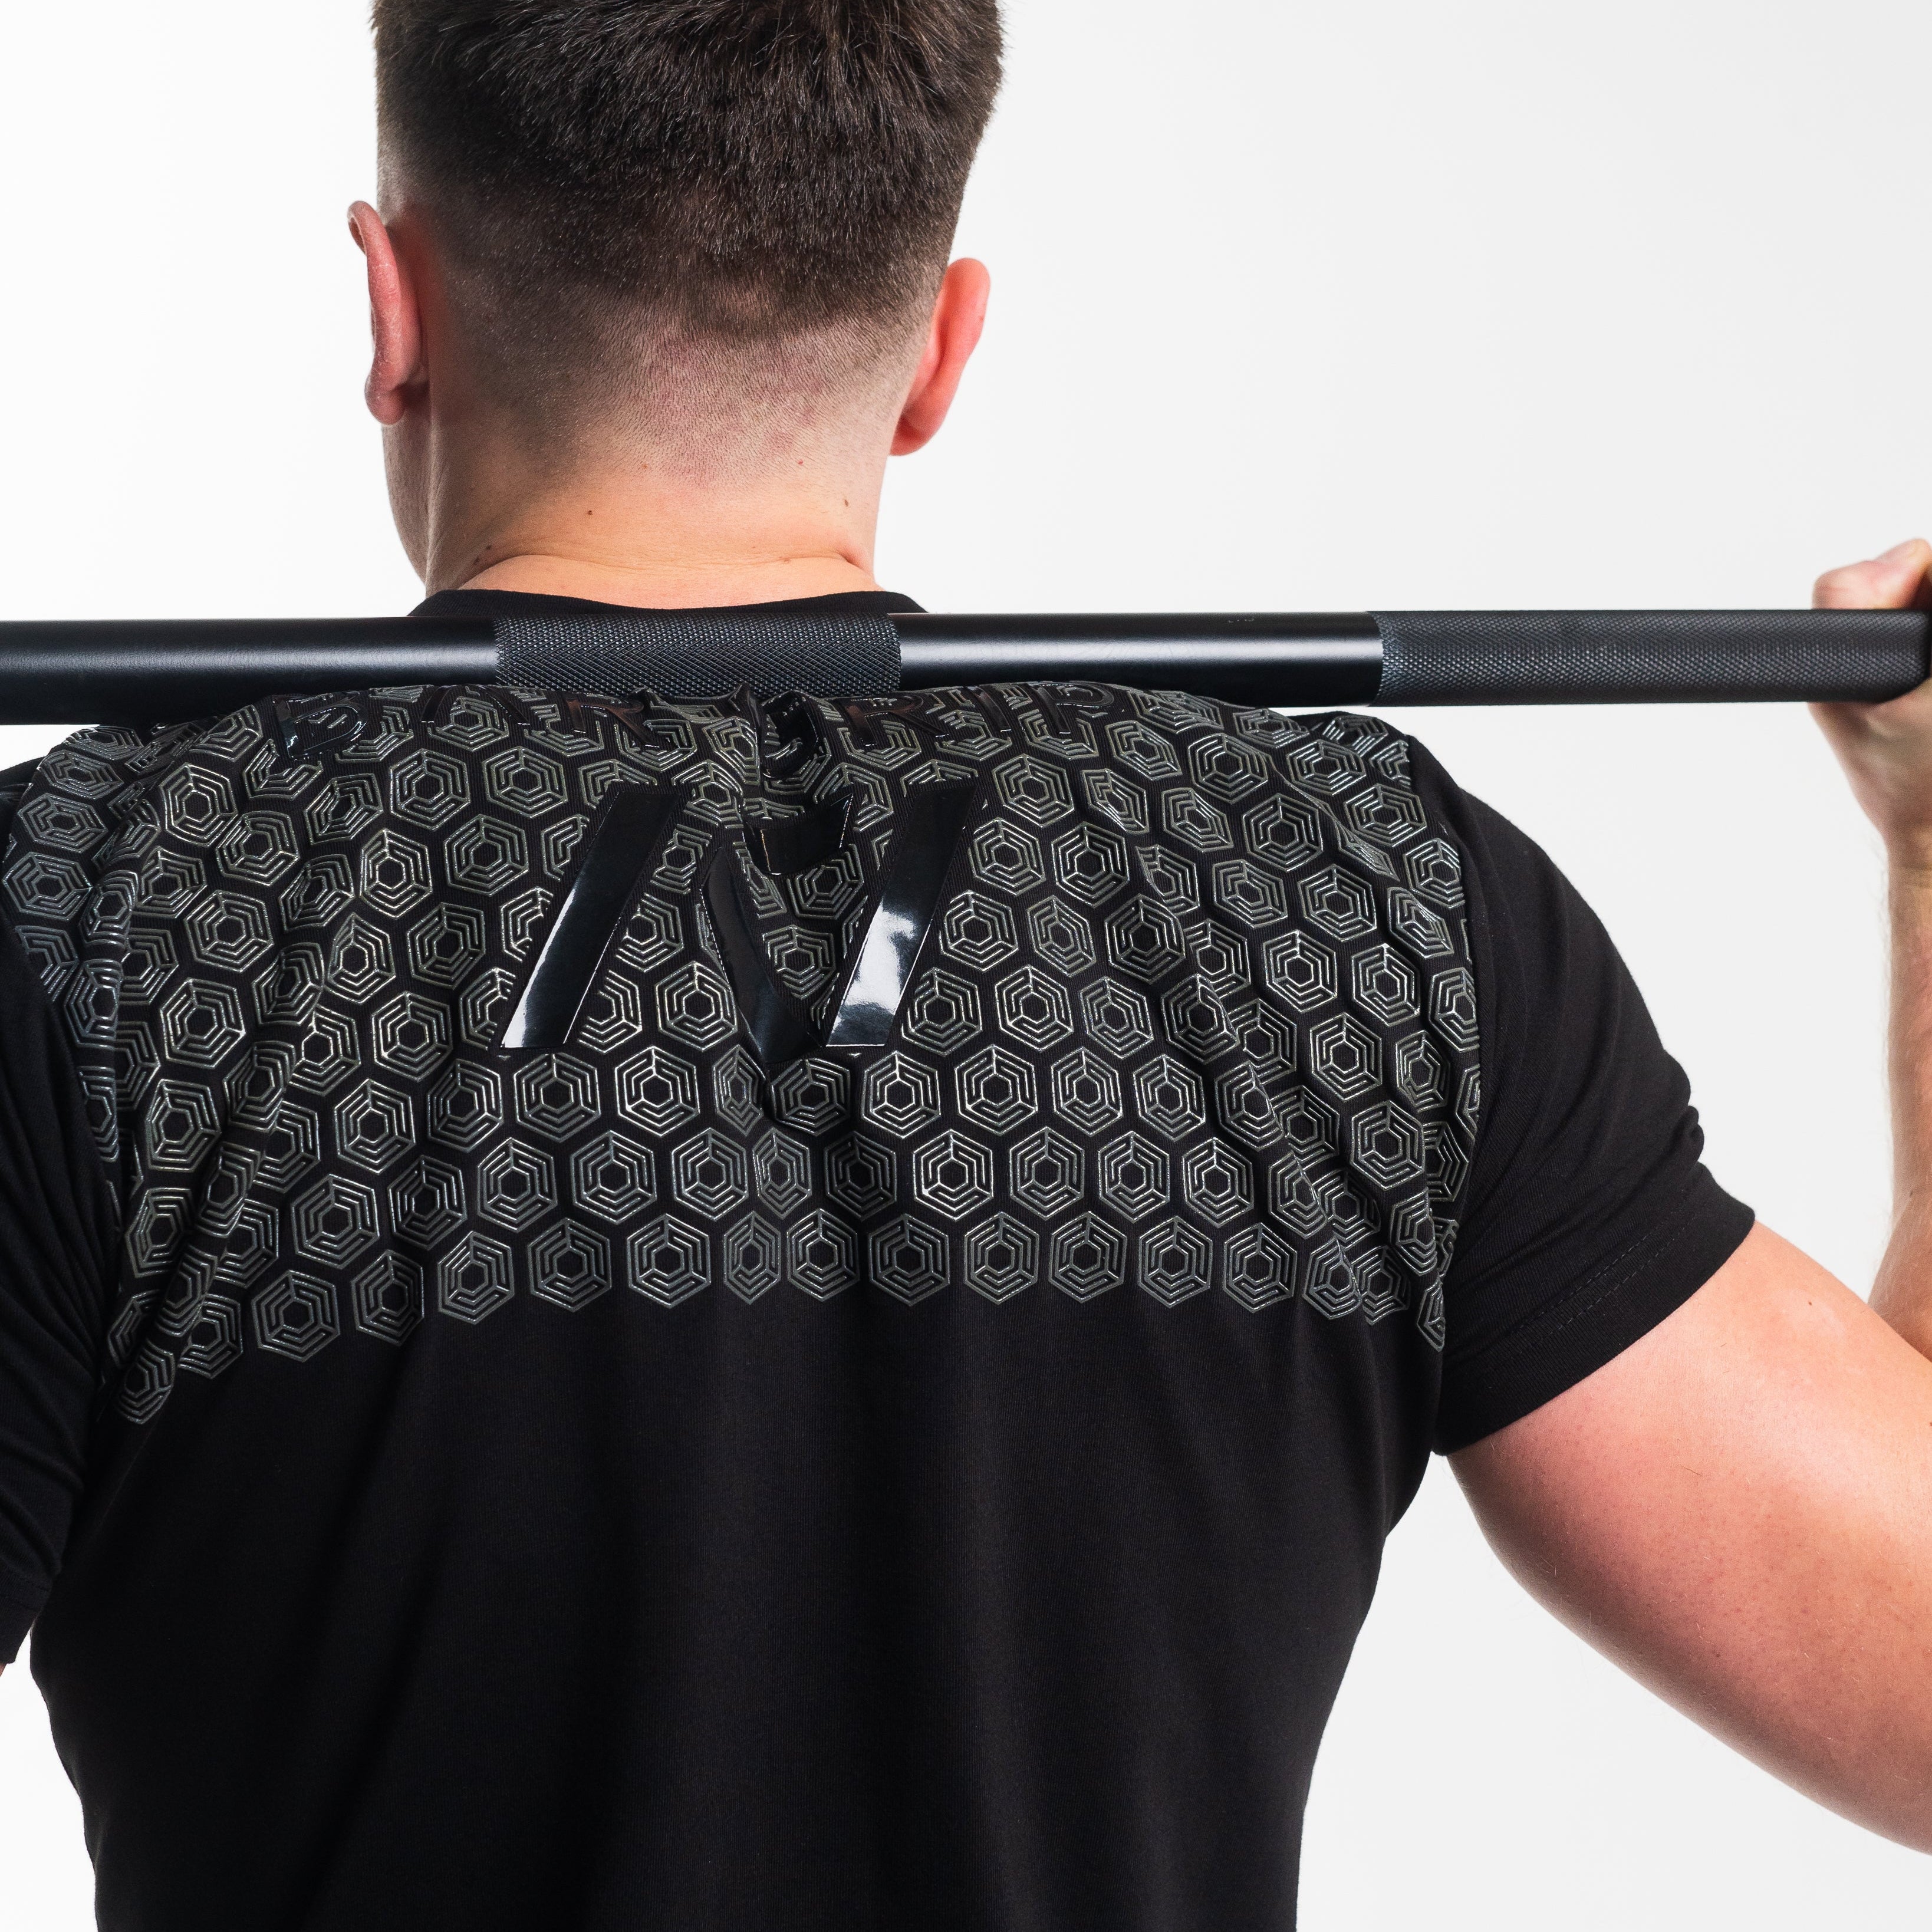 Crest is our classic black on black design. With the Stealth Bar Grip Shirt you can be noticed, yet still, be able to be subtle. The A7 silicone bar grip helps with slippery commercial benches and bars and anchors the barbell to your back. All A7 Powerlifting Equipment shipping to France, Spain, Ireland, Germany, Italy, Sweden and EU.